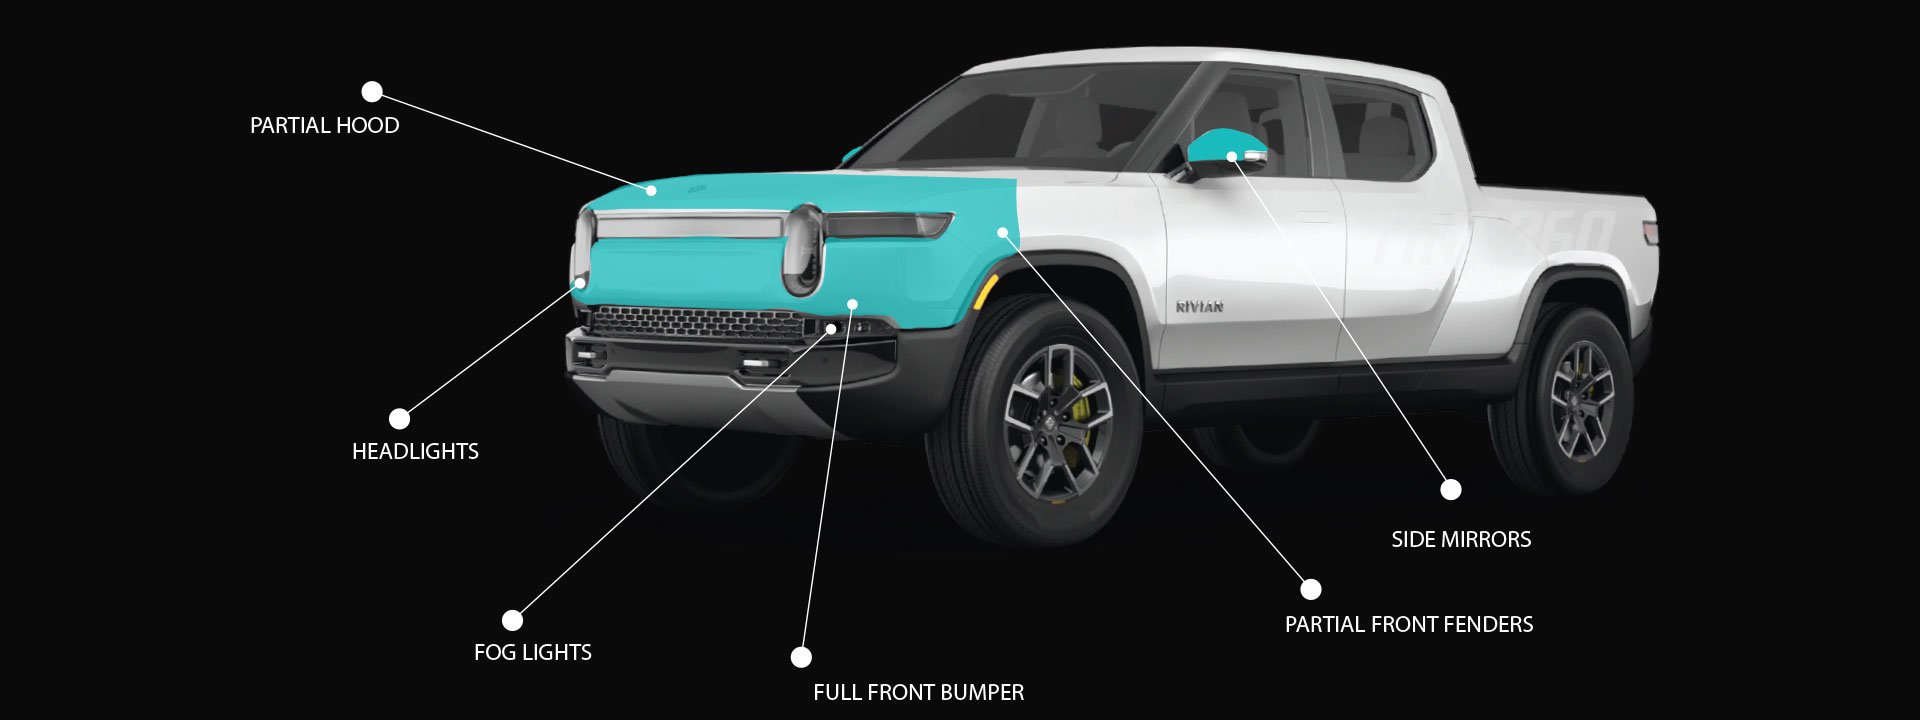 partial frontal rivian paint protection films package